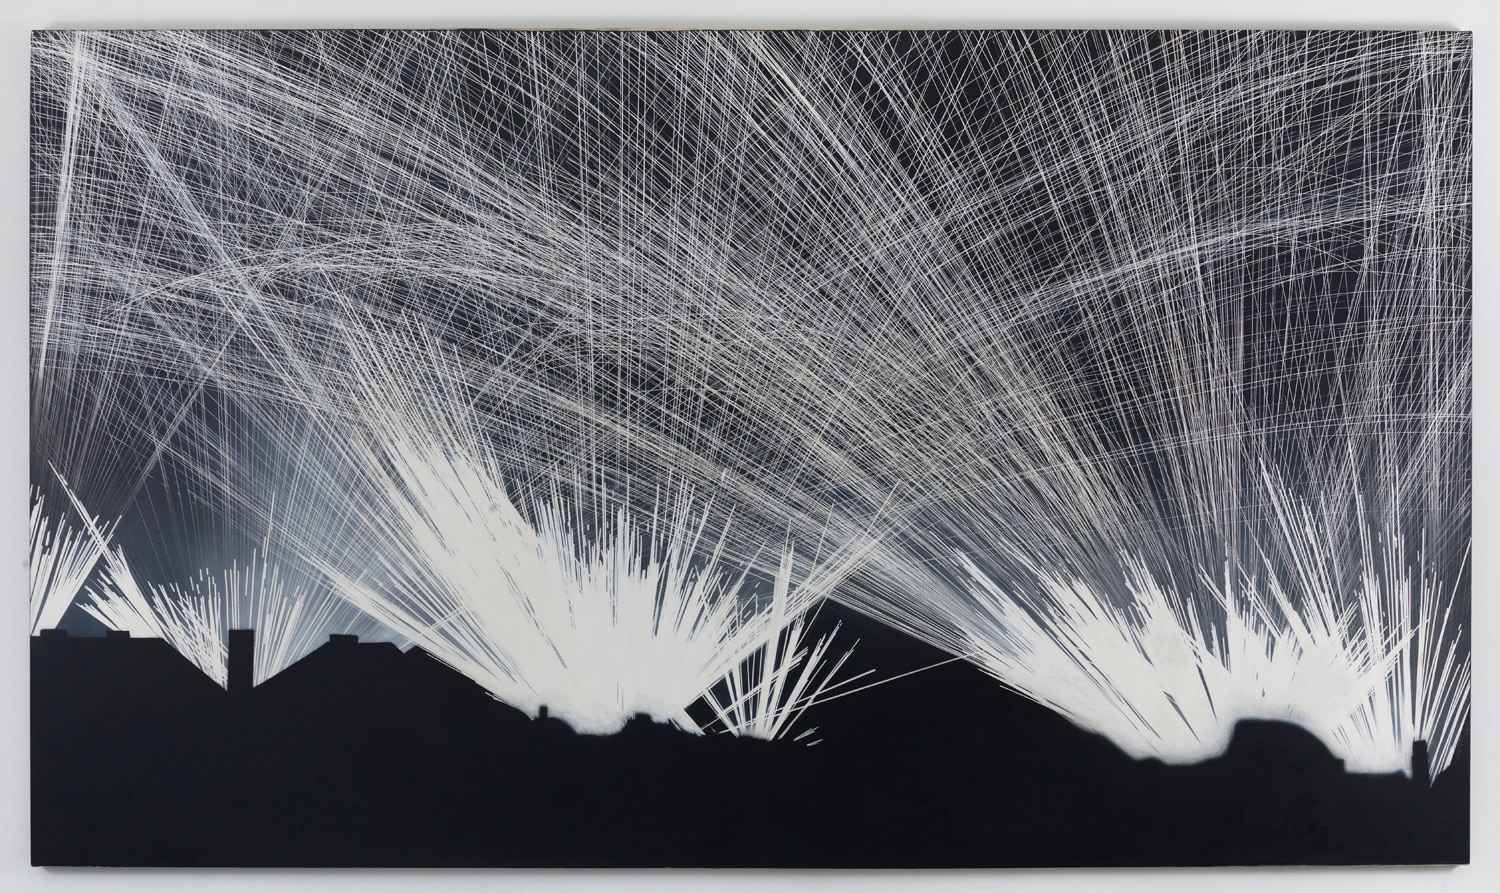 Some of Jack Goldstein&rsquo;s work is based on images of lightning strikes or aerial bombardments.